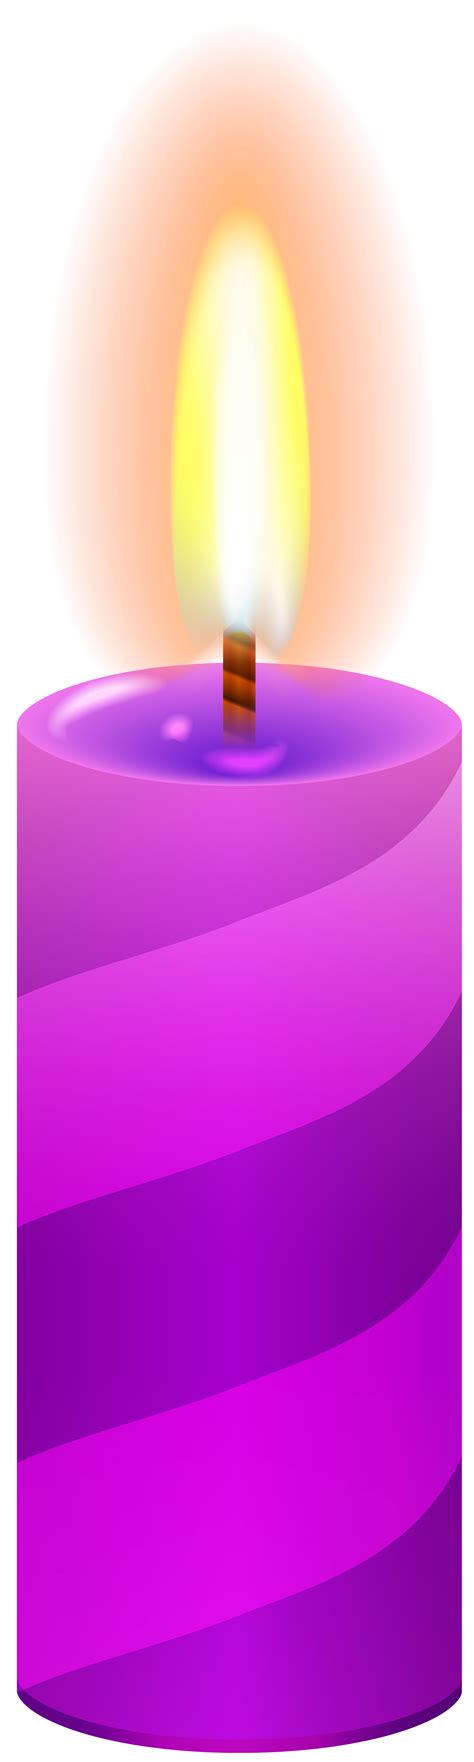 Clipart candle pink candle, Clipart candle pink candle Transparent FREE for download on ...